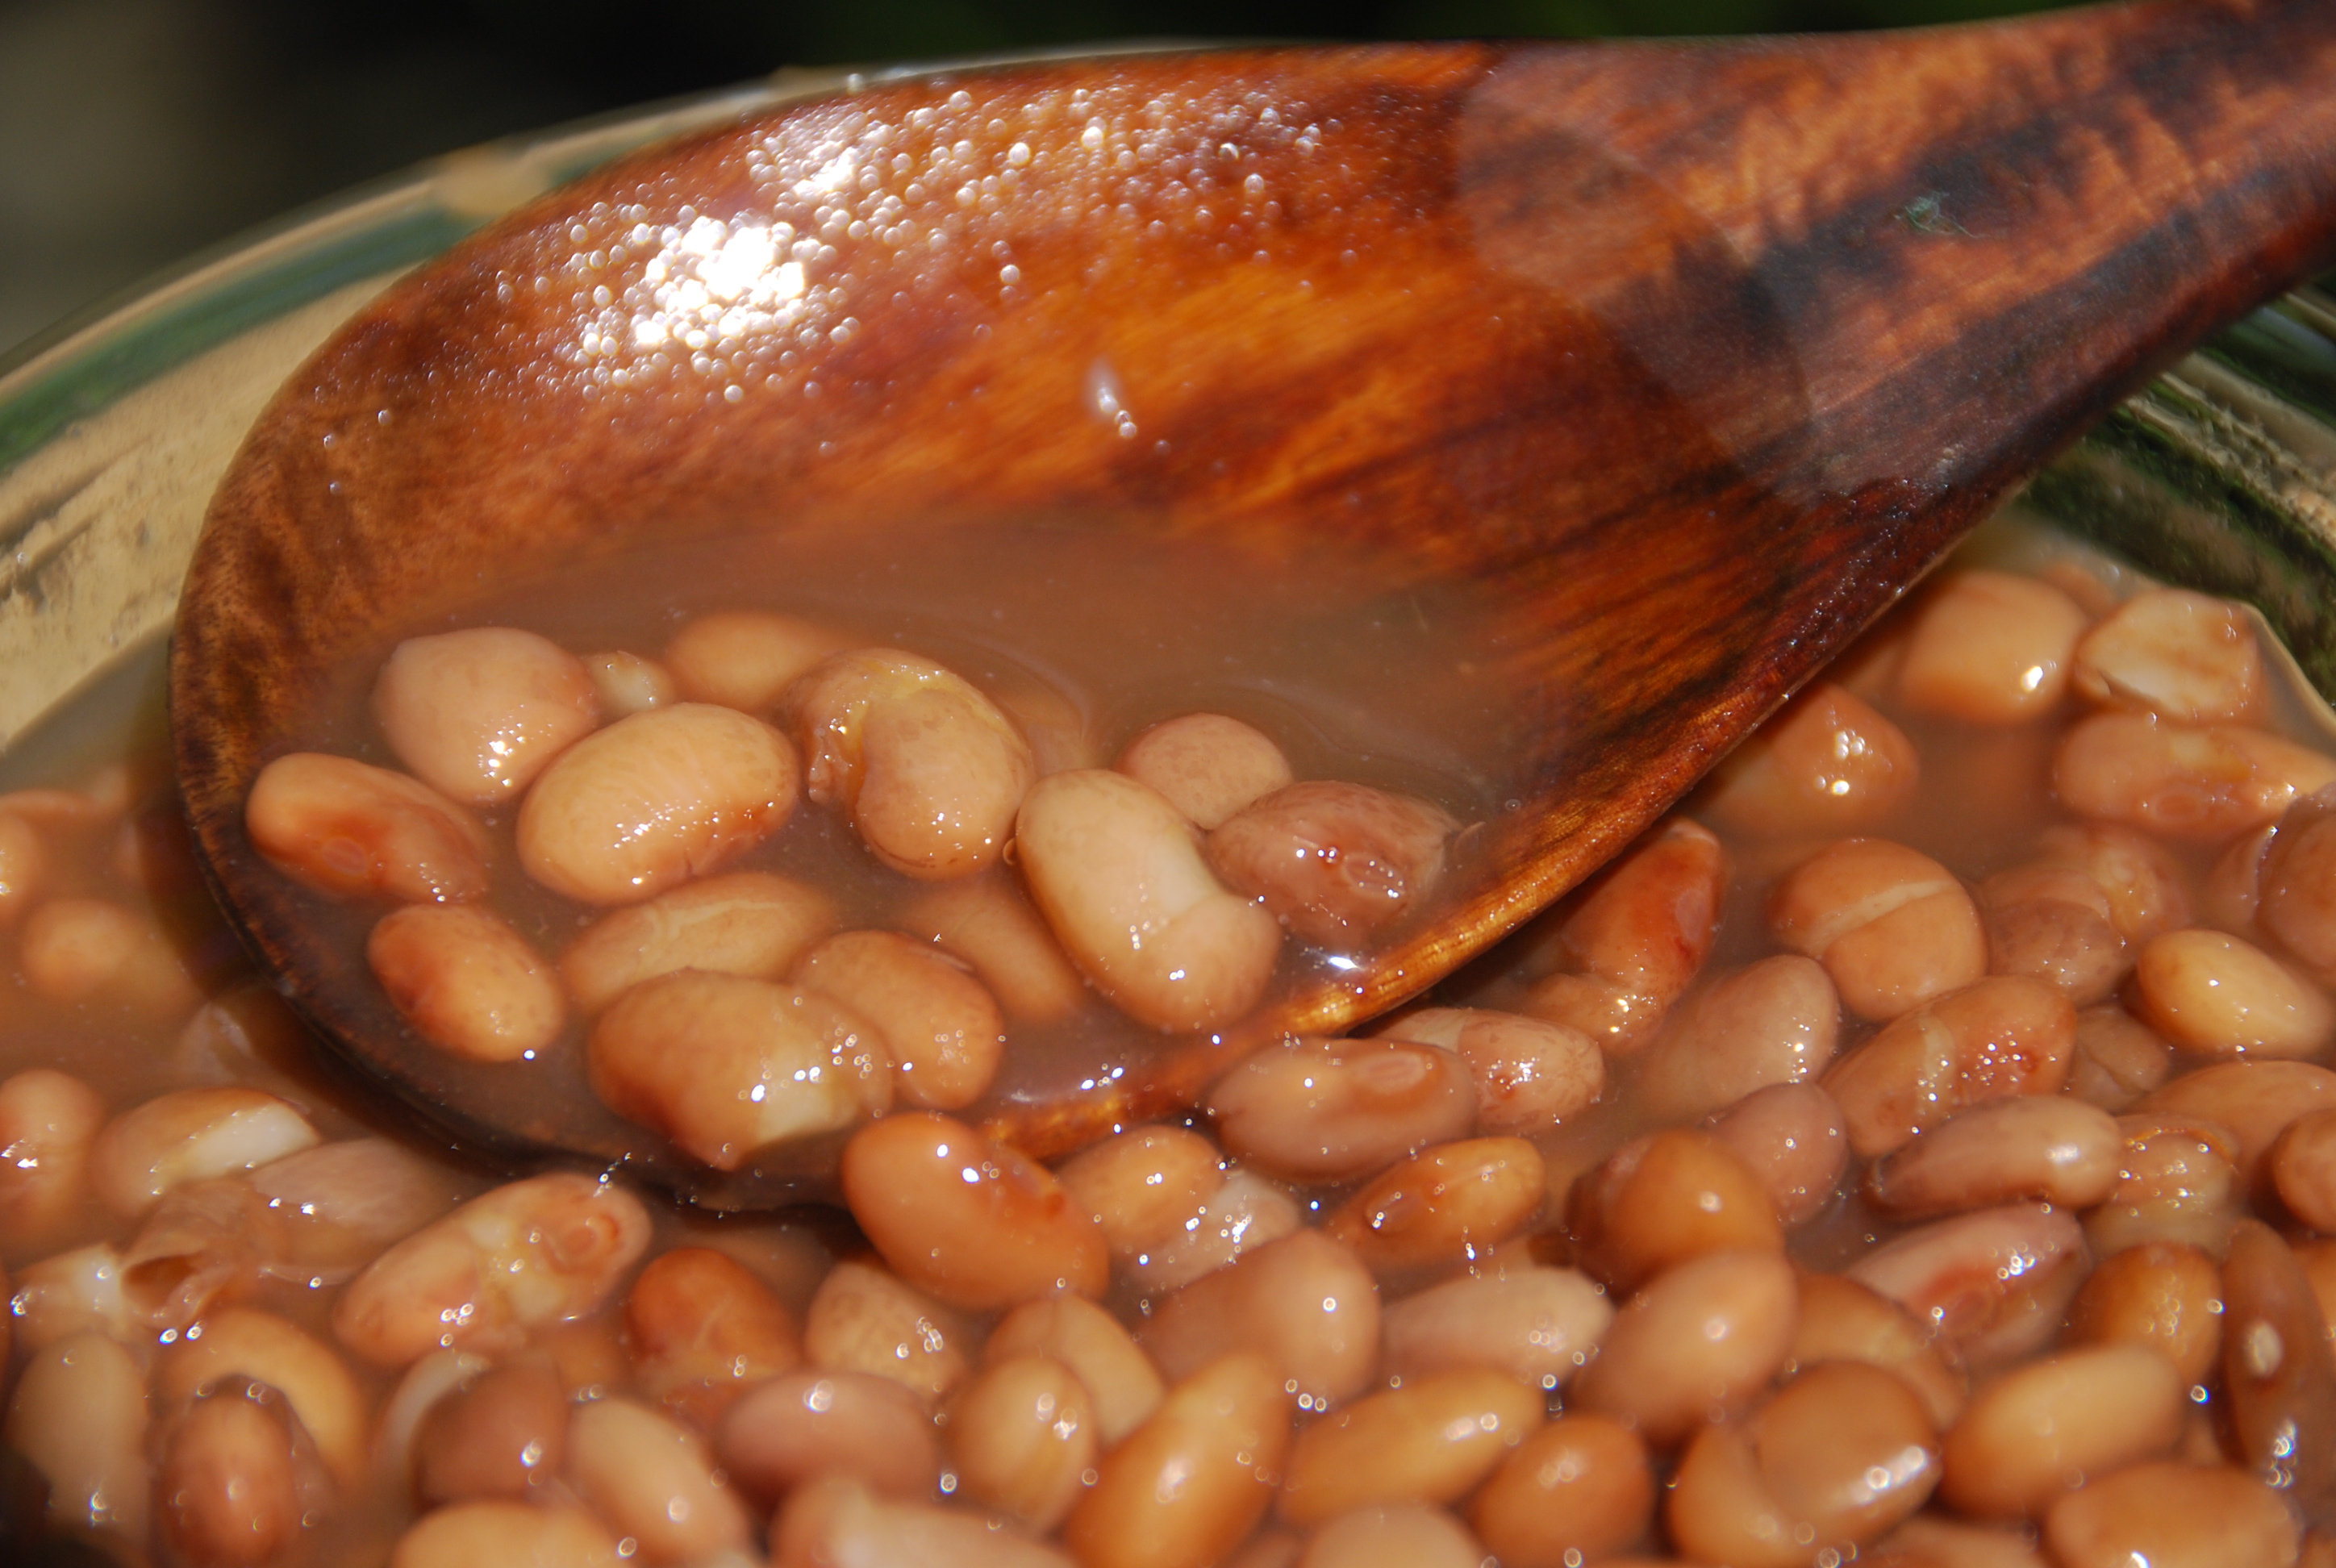 beans from the pot or frijoles de olla